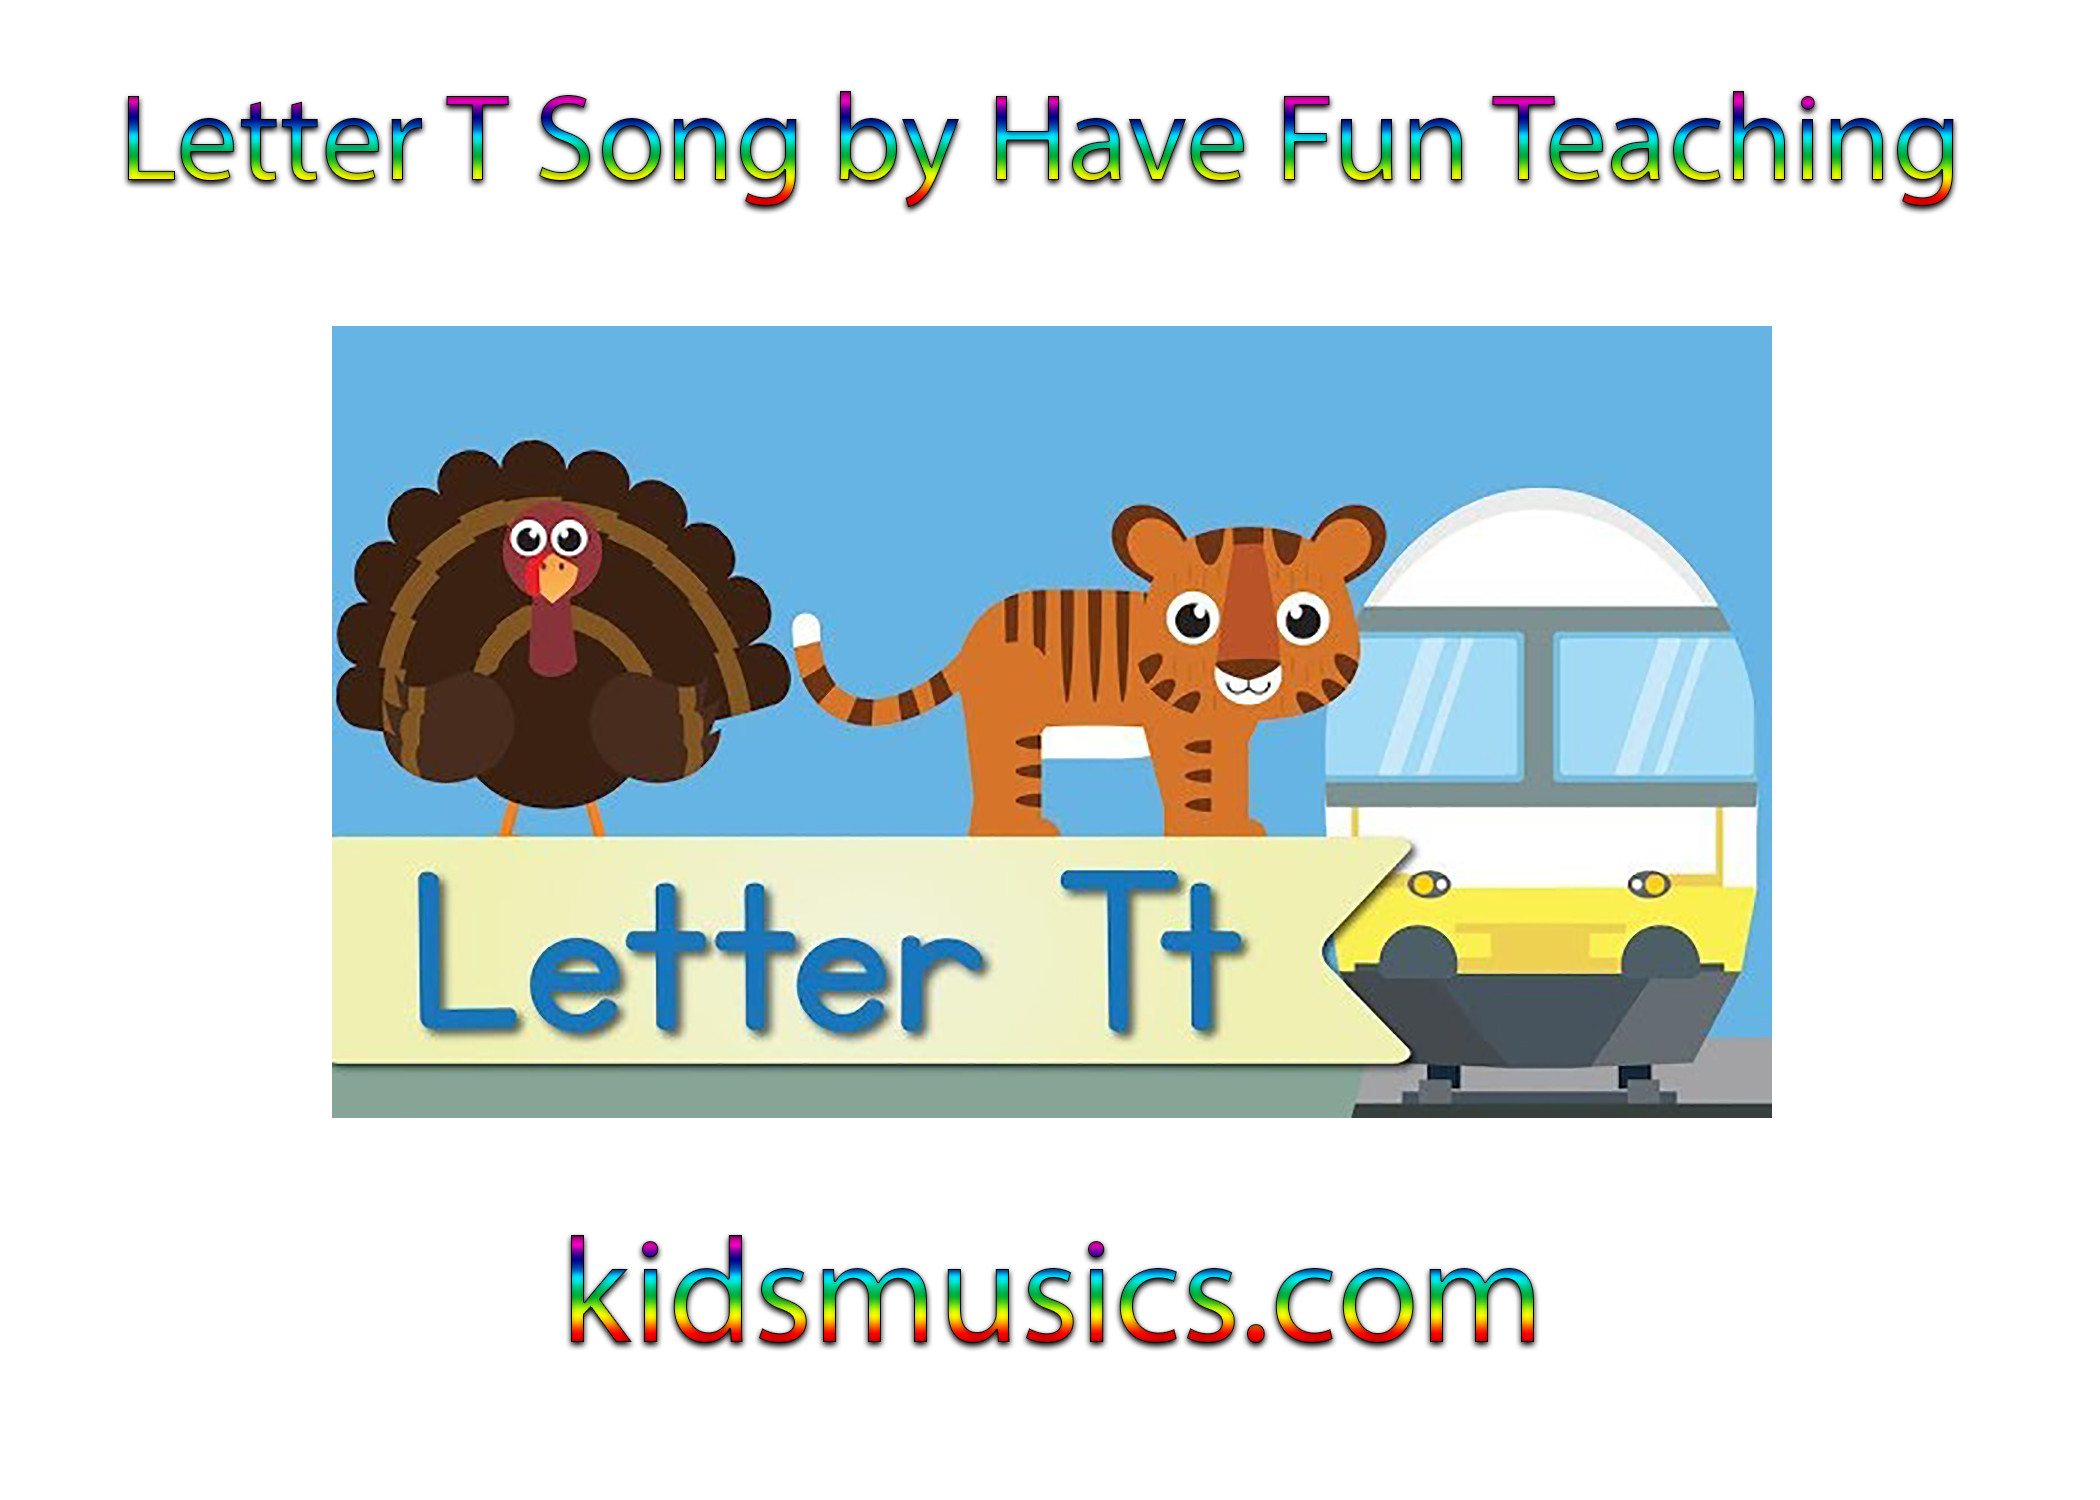 Letter T Song by Have Fun Teaching